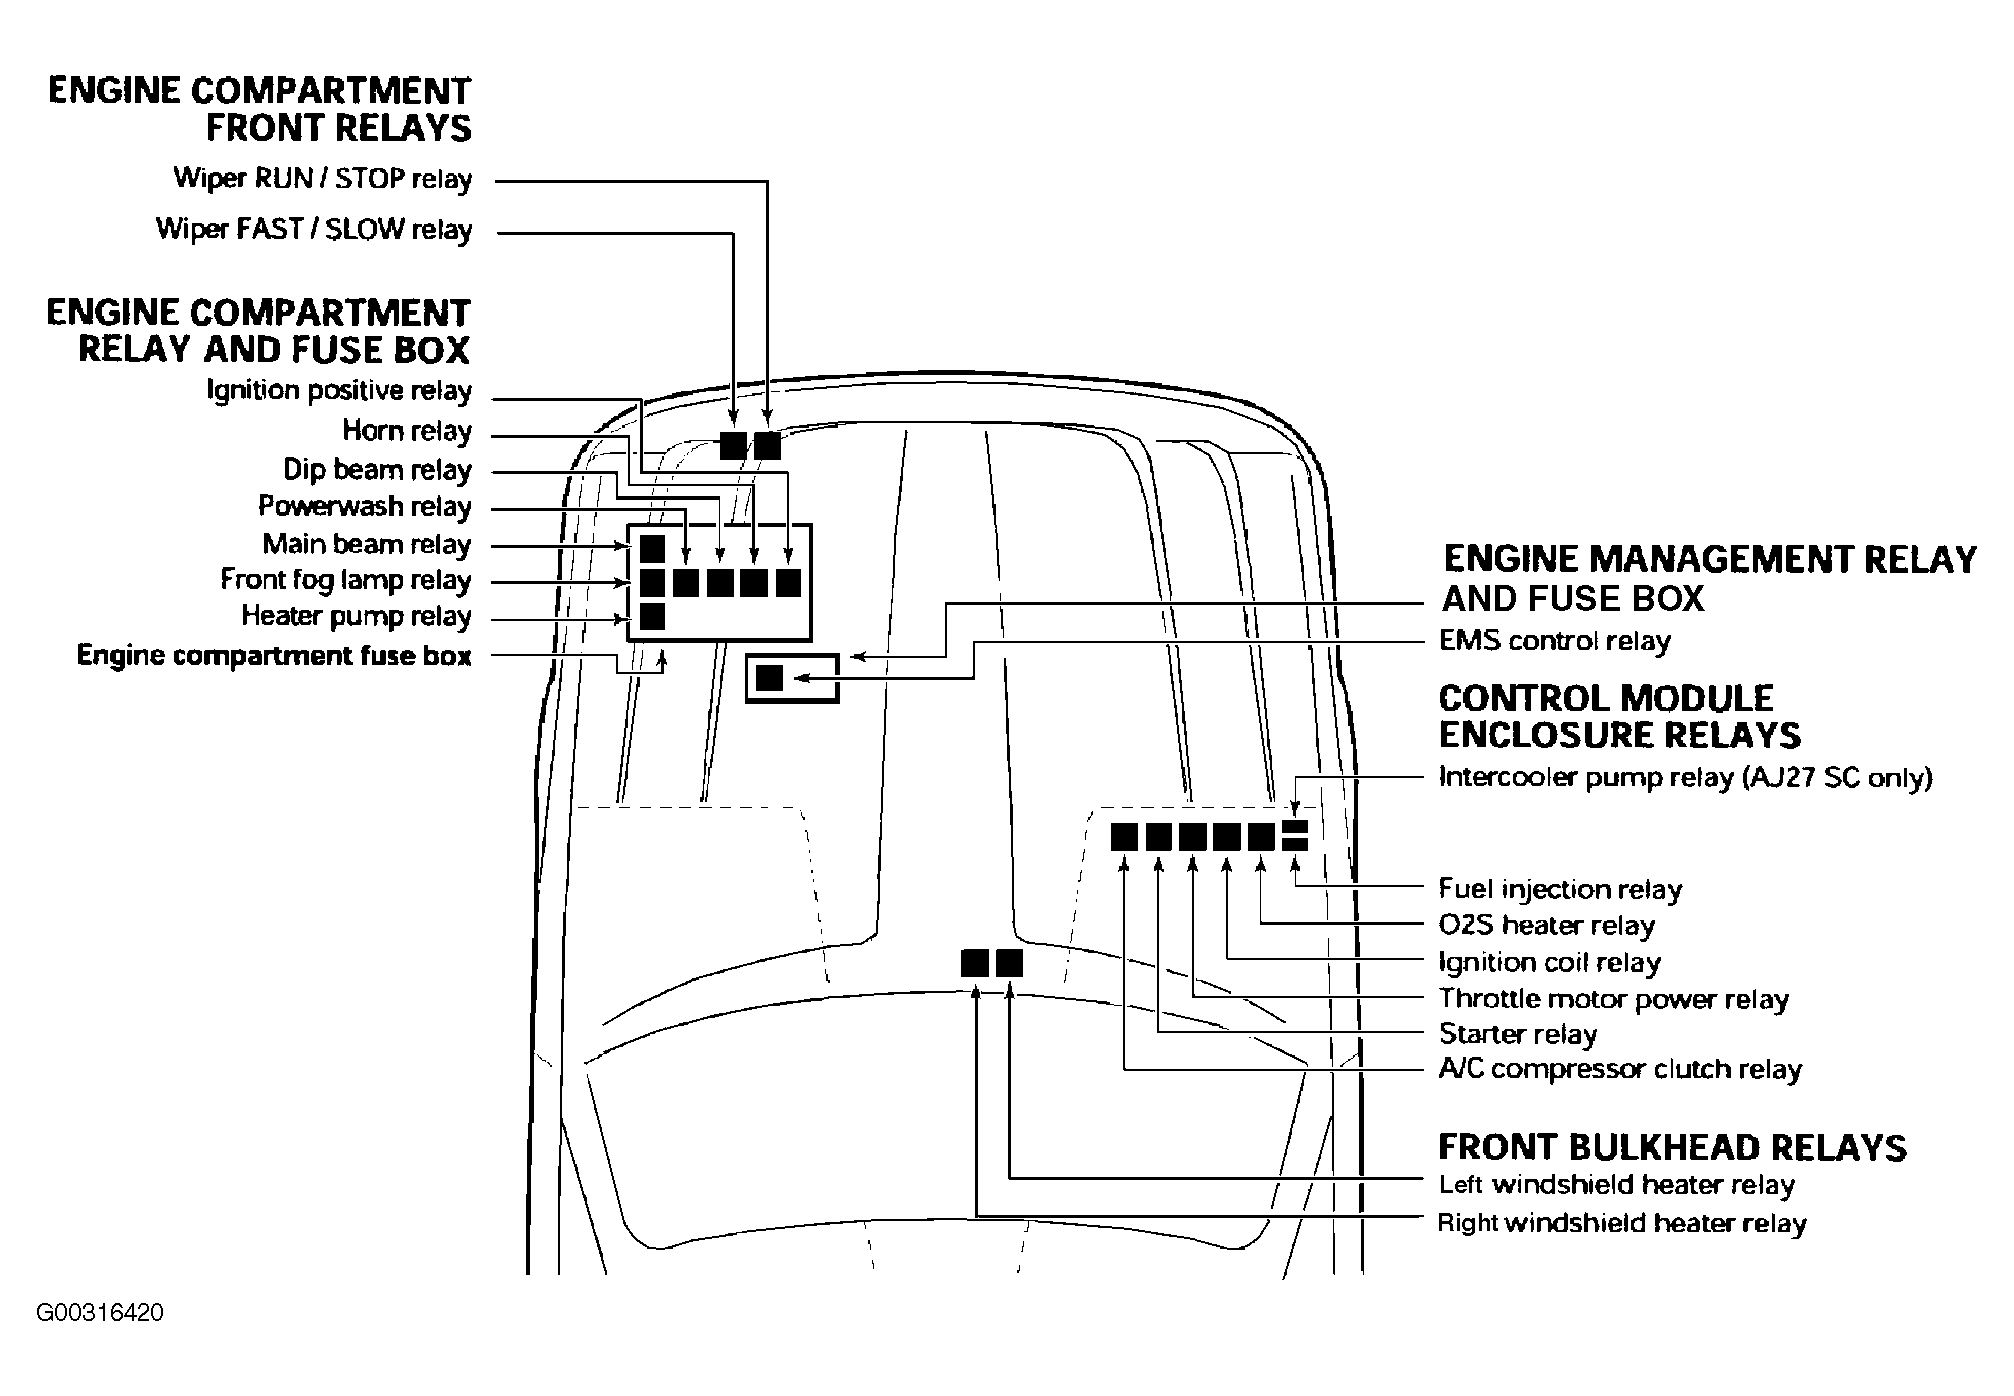 Jaguar XJ8 2001 - Component Locations -  Identifying Engine Compartment Fuse/Relay Locations